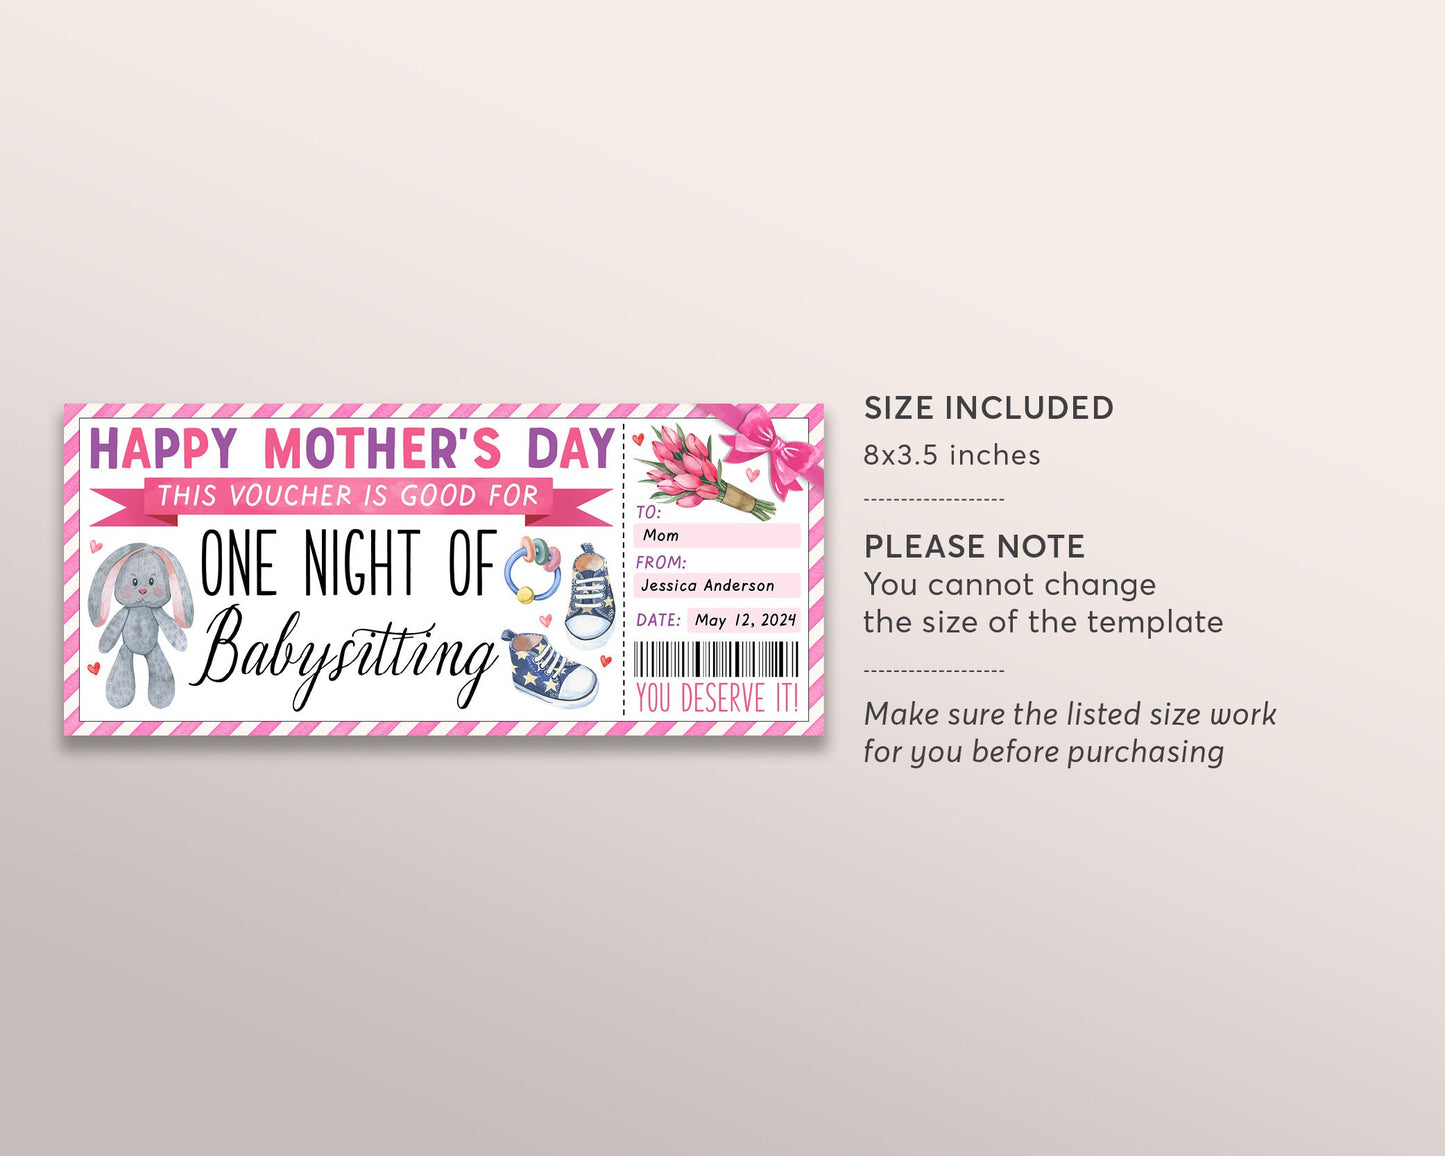 Mothers Day Babysitting Gift Coupon Editable Template, Valentine Surprise Babysitter Gift Ticket Voucher For New Mom, Certificate Gift Card